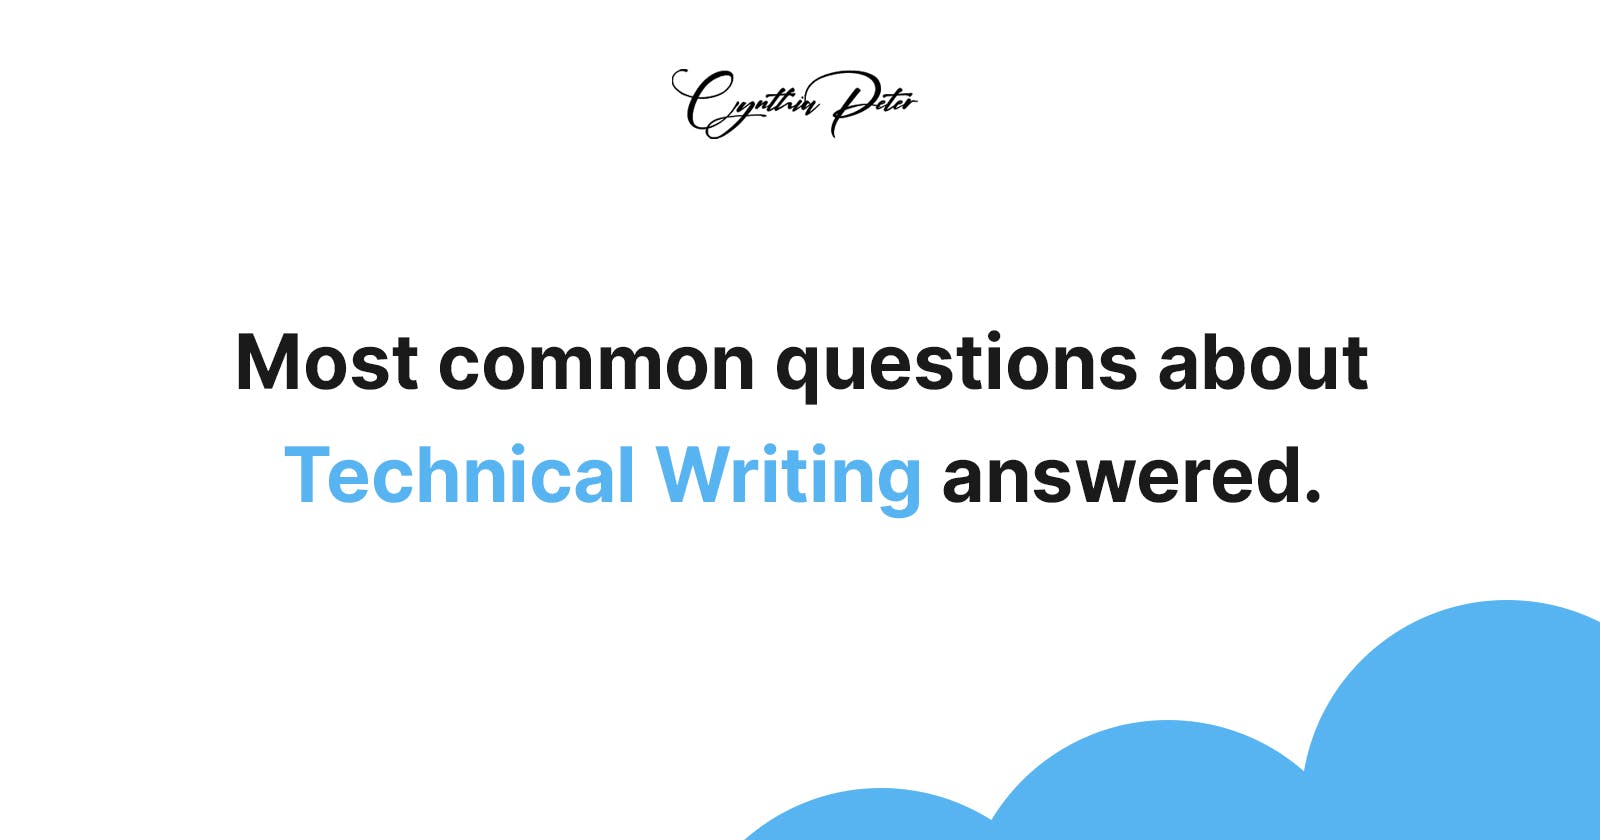 Most Common Questions About Technical Writing Answered